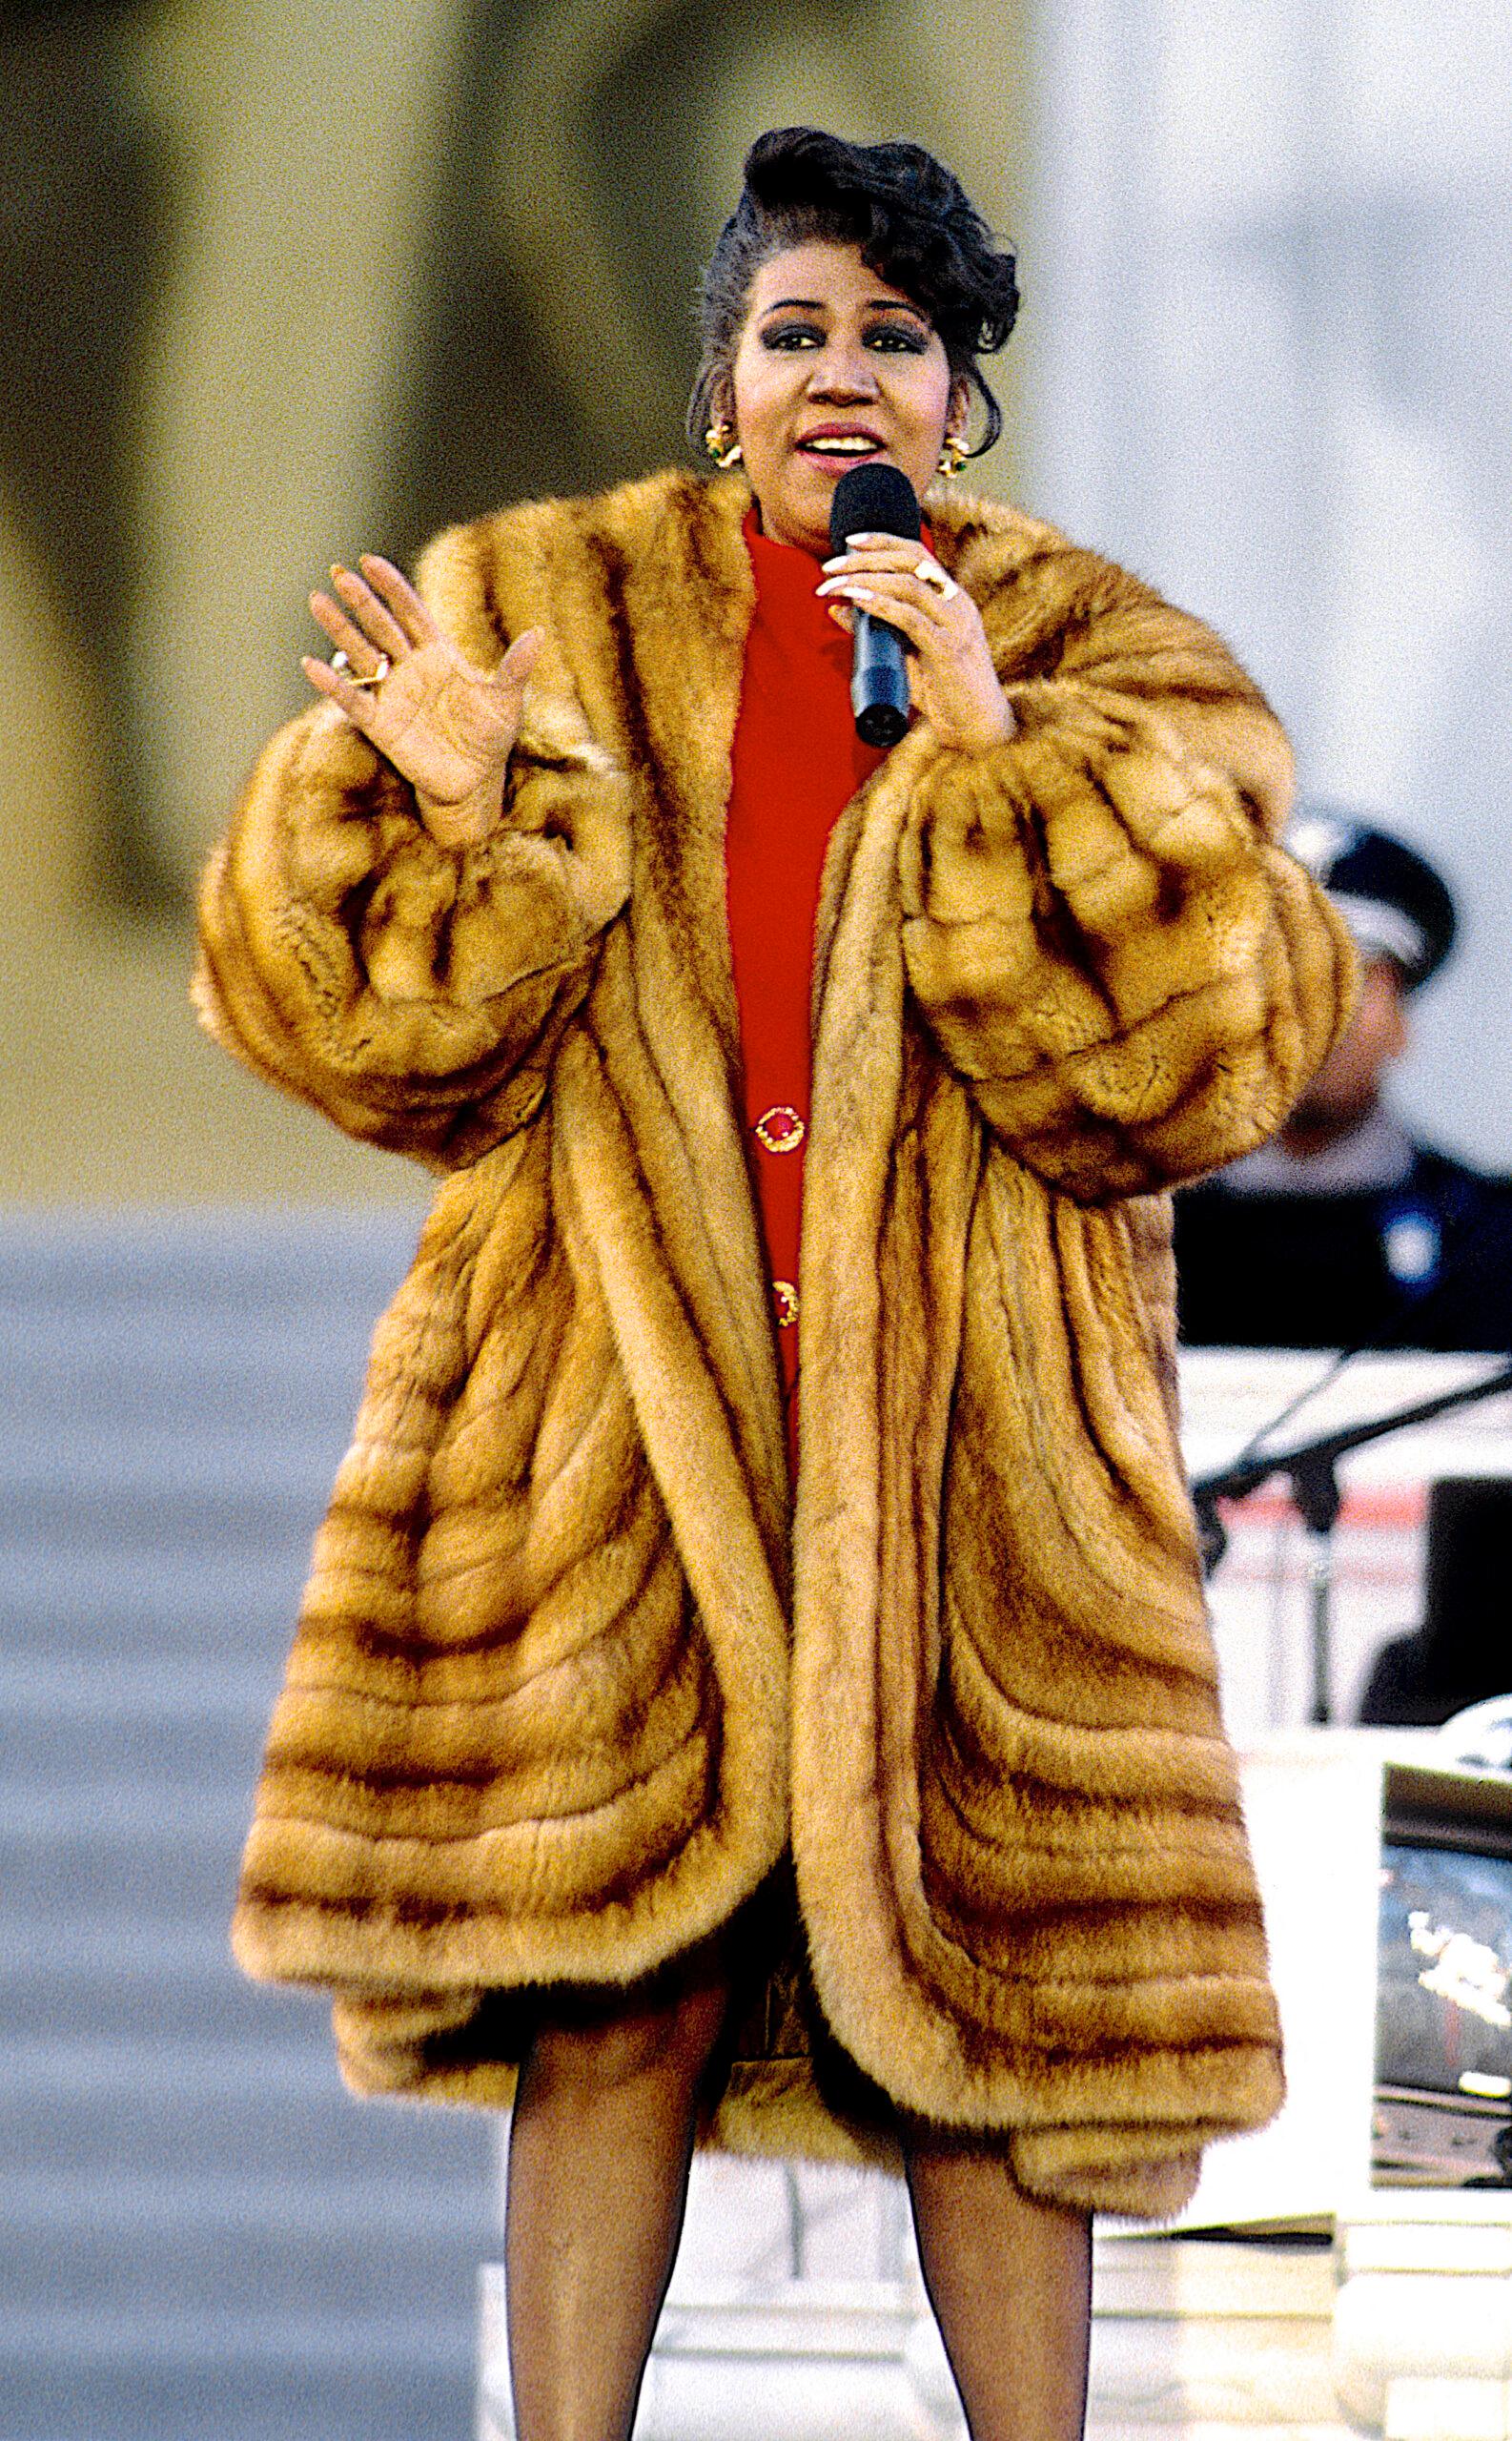 Late Aretha Franklin performs at the Lincoln Memorial, 1993